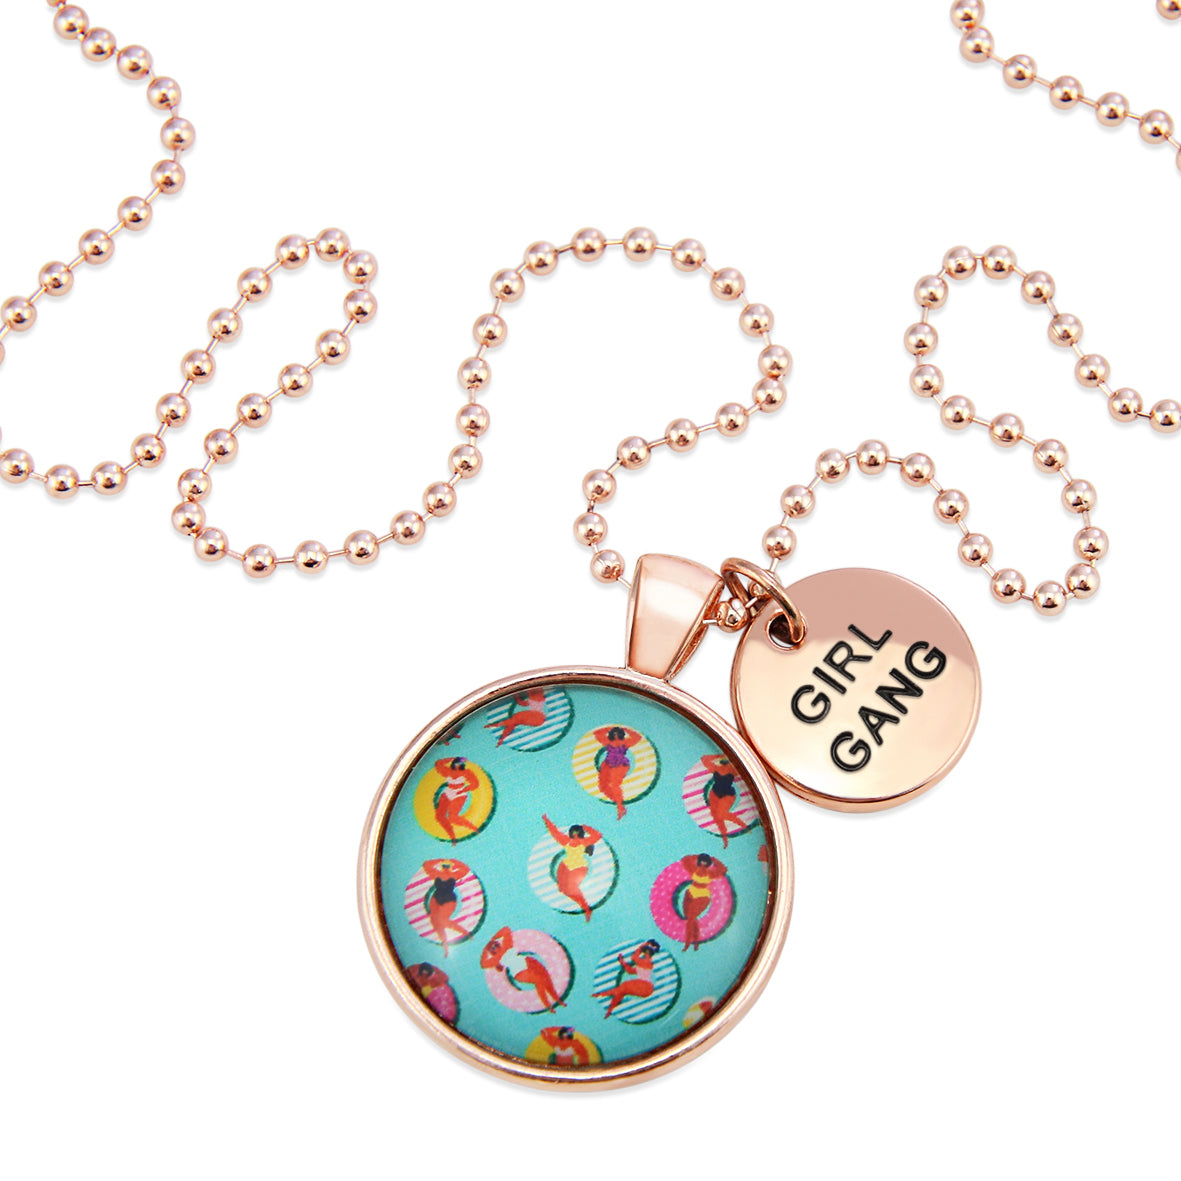 Rose Gold 'GIRL GANG' Necklace - Swim Party (12414)